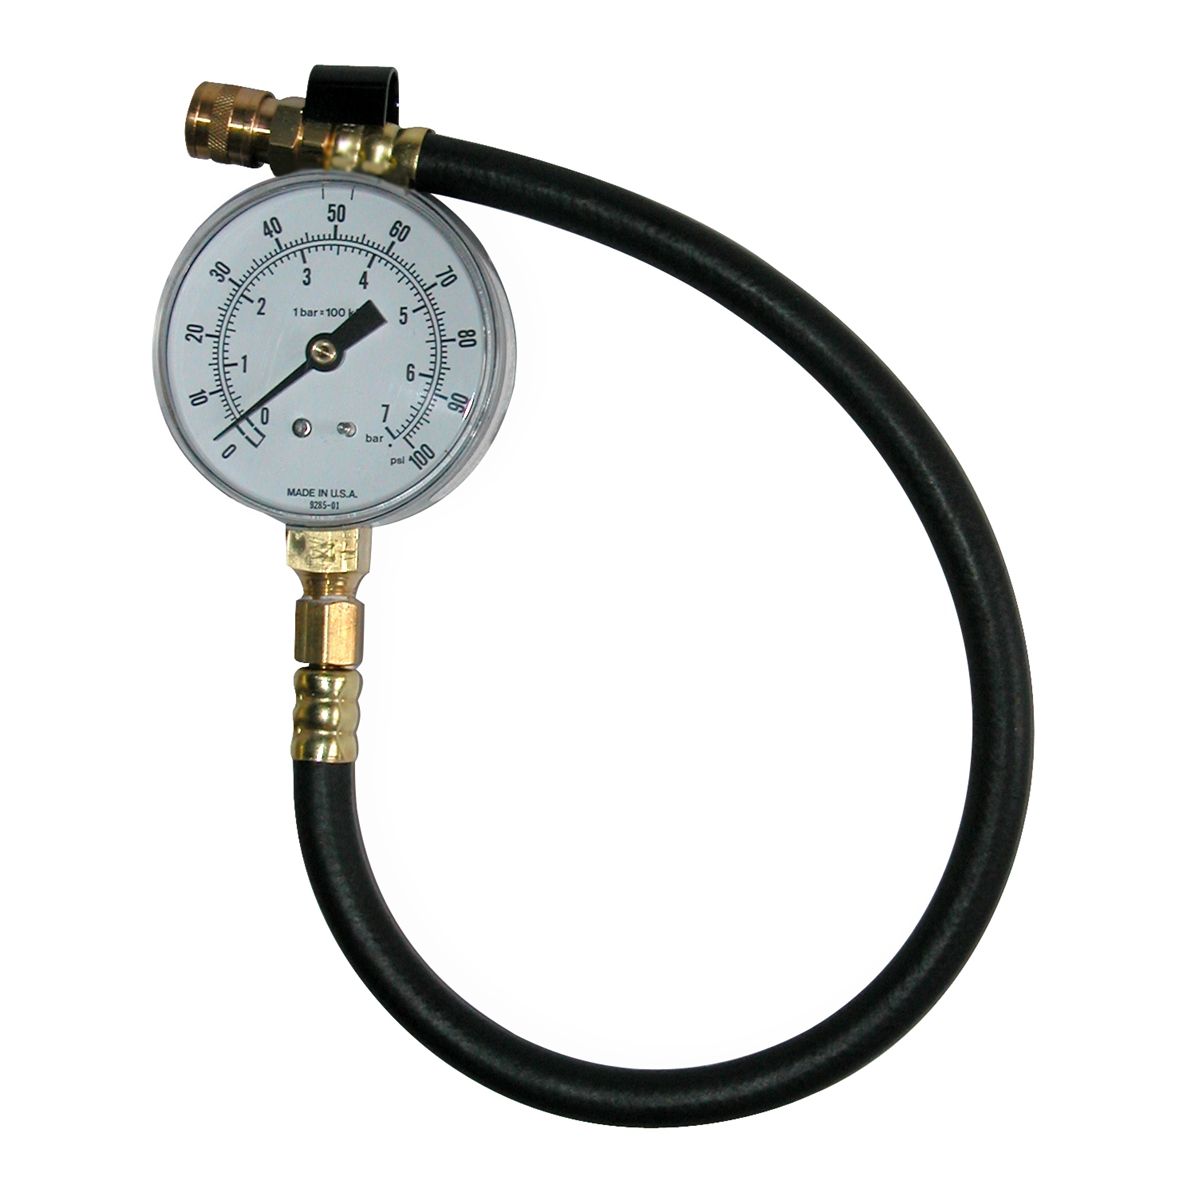 Fuel Injection Gauge for TU-448 - 2-1/2 Inch 100 PSI